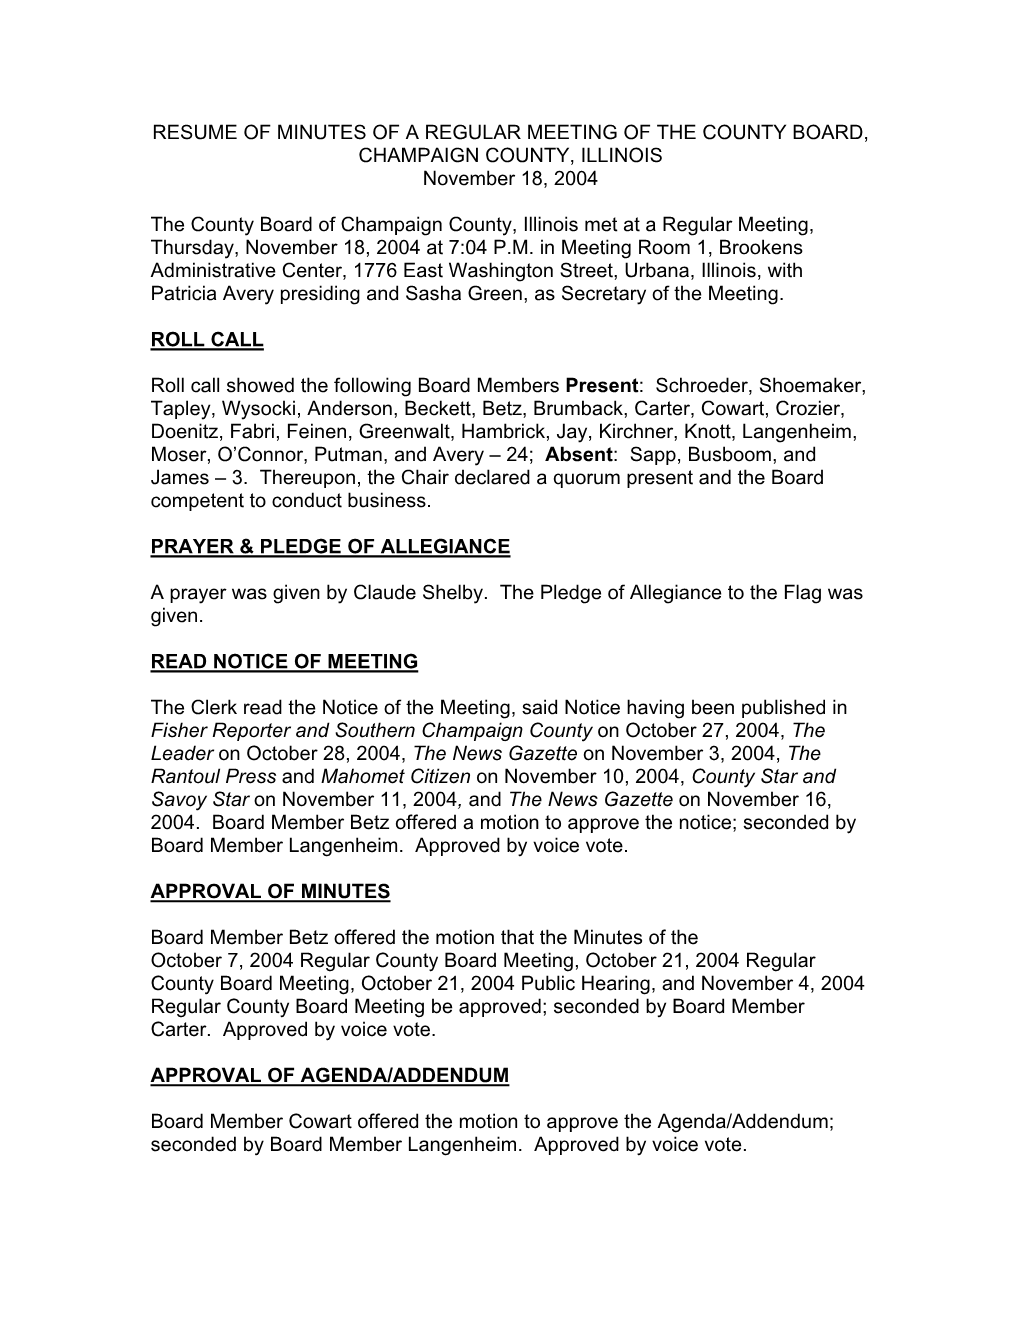 RESUME of MINUTES of a REGULAR MEETING of the COUNTY BOARD, CHAMPAIGN COUNTY, ILLINOIS November 18, 2004